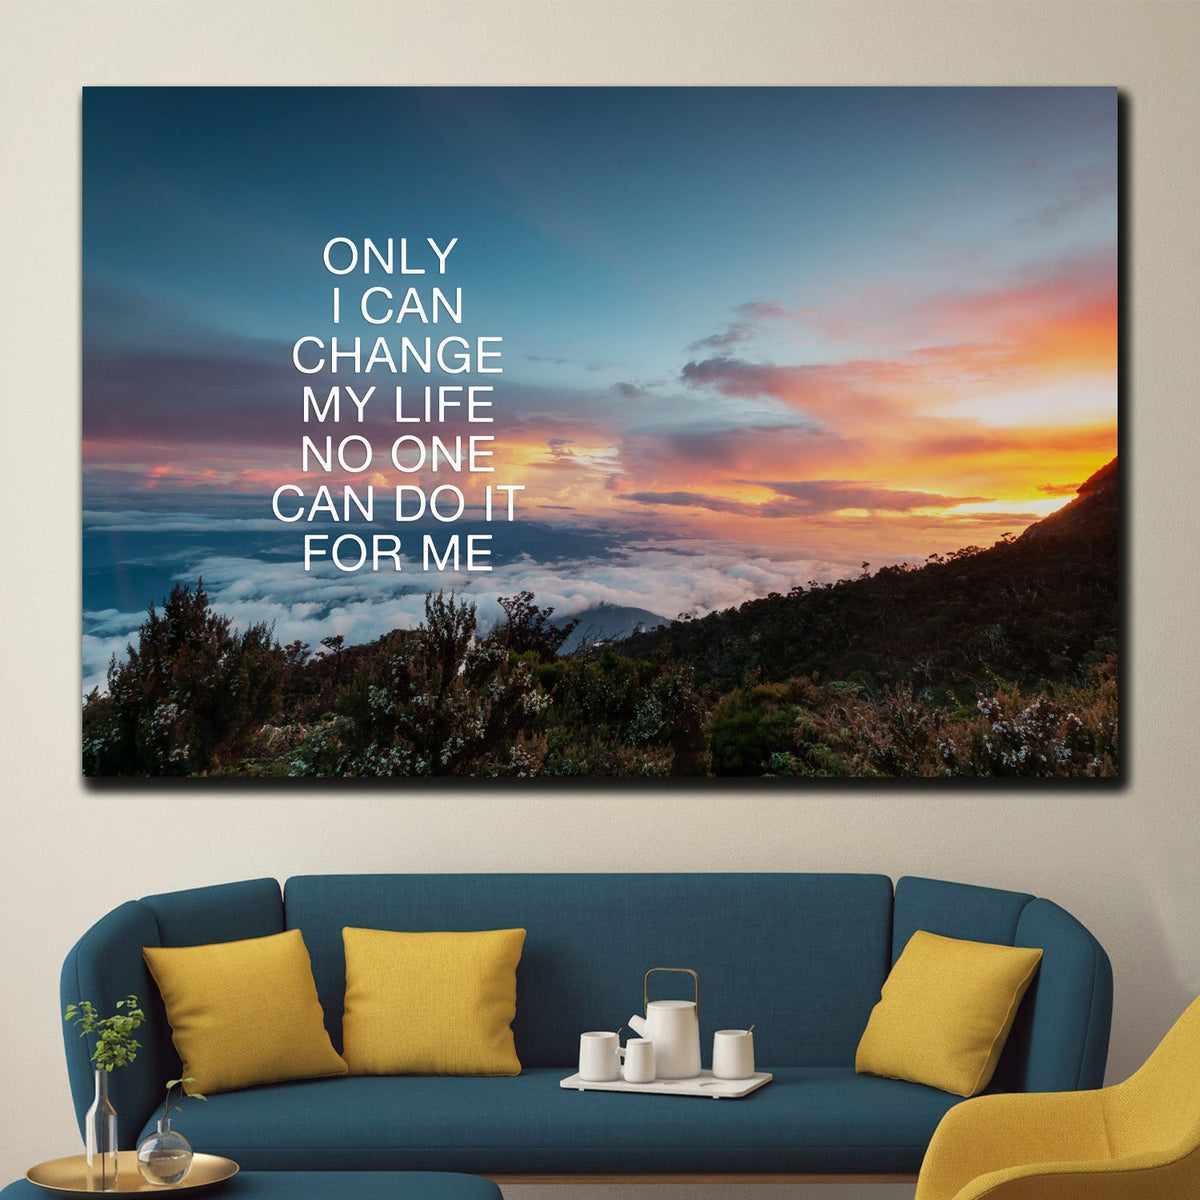 https://cdn.shopify.com/s/files/1/0387/9986/8044/products/ChangeMyLifeCanvasArtprintStretched-3.jpg